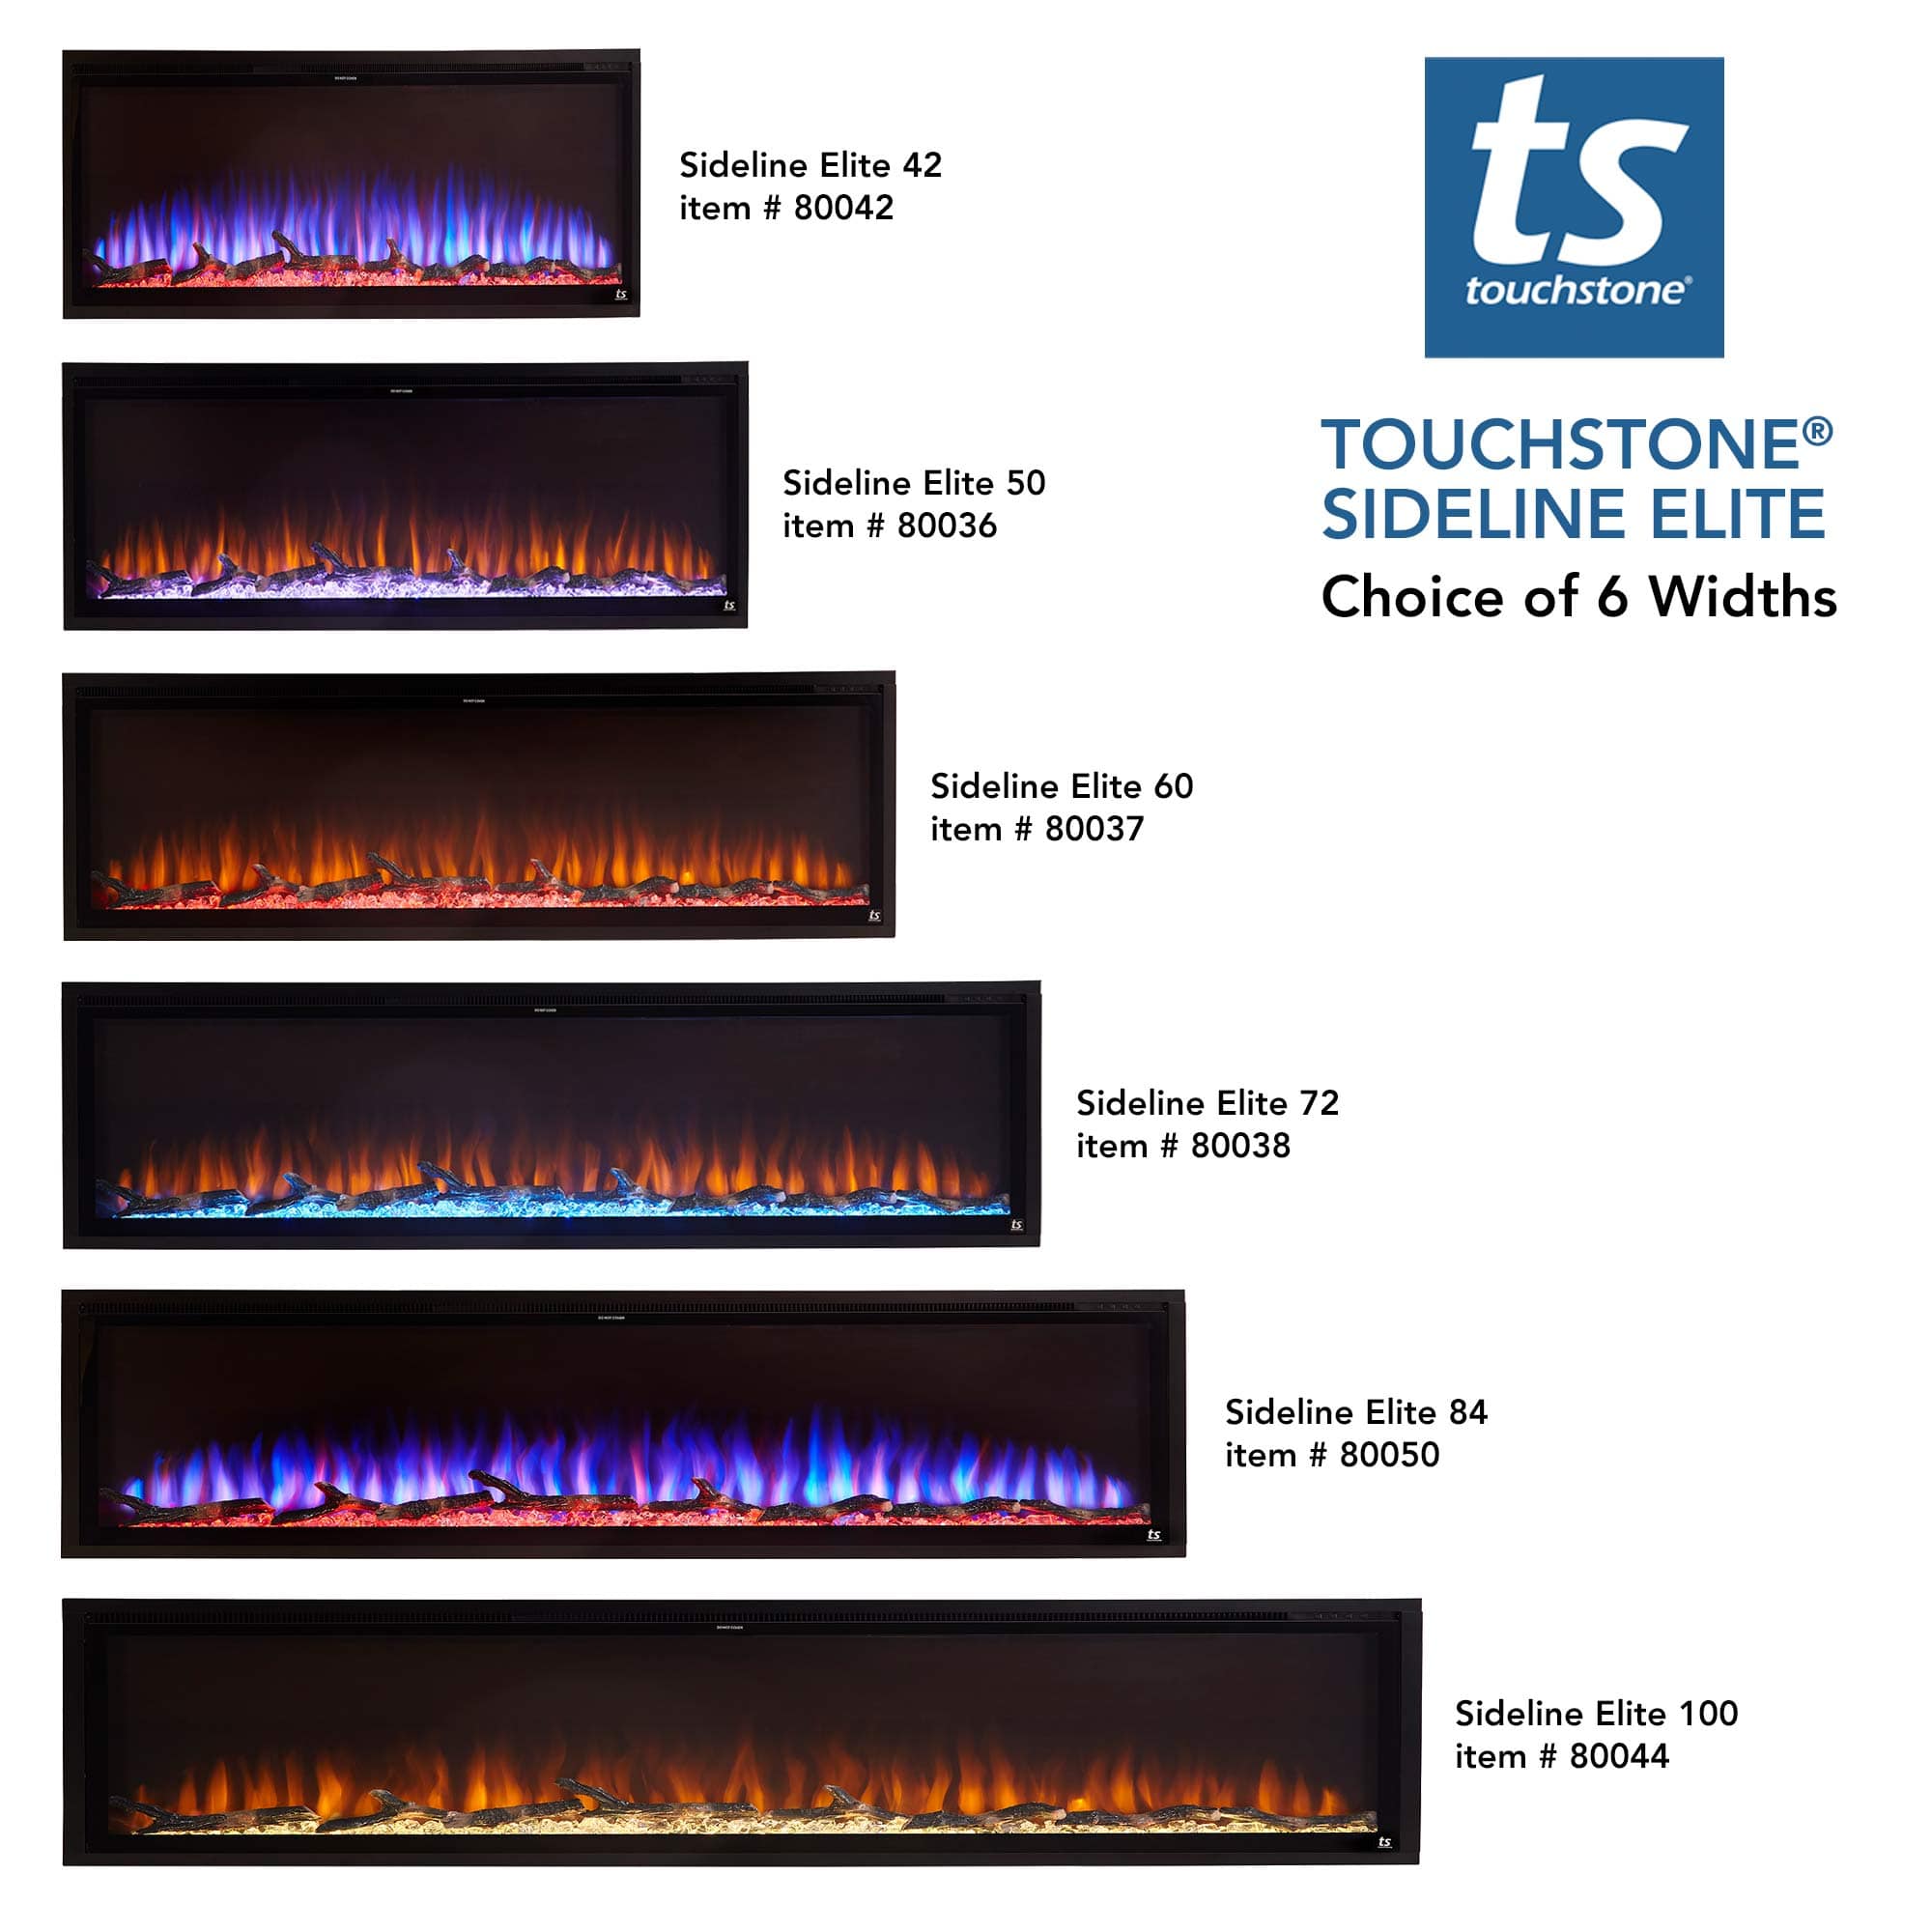 Touchstone Sideline Elite Smart Electric Fireplace width options